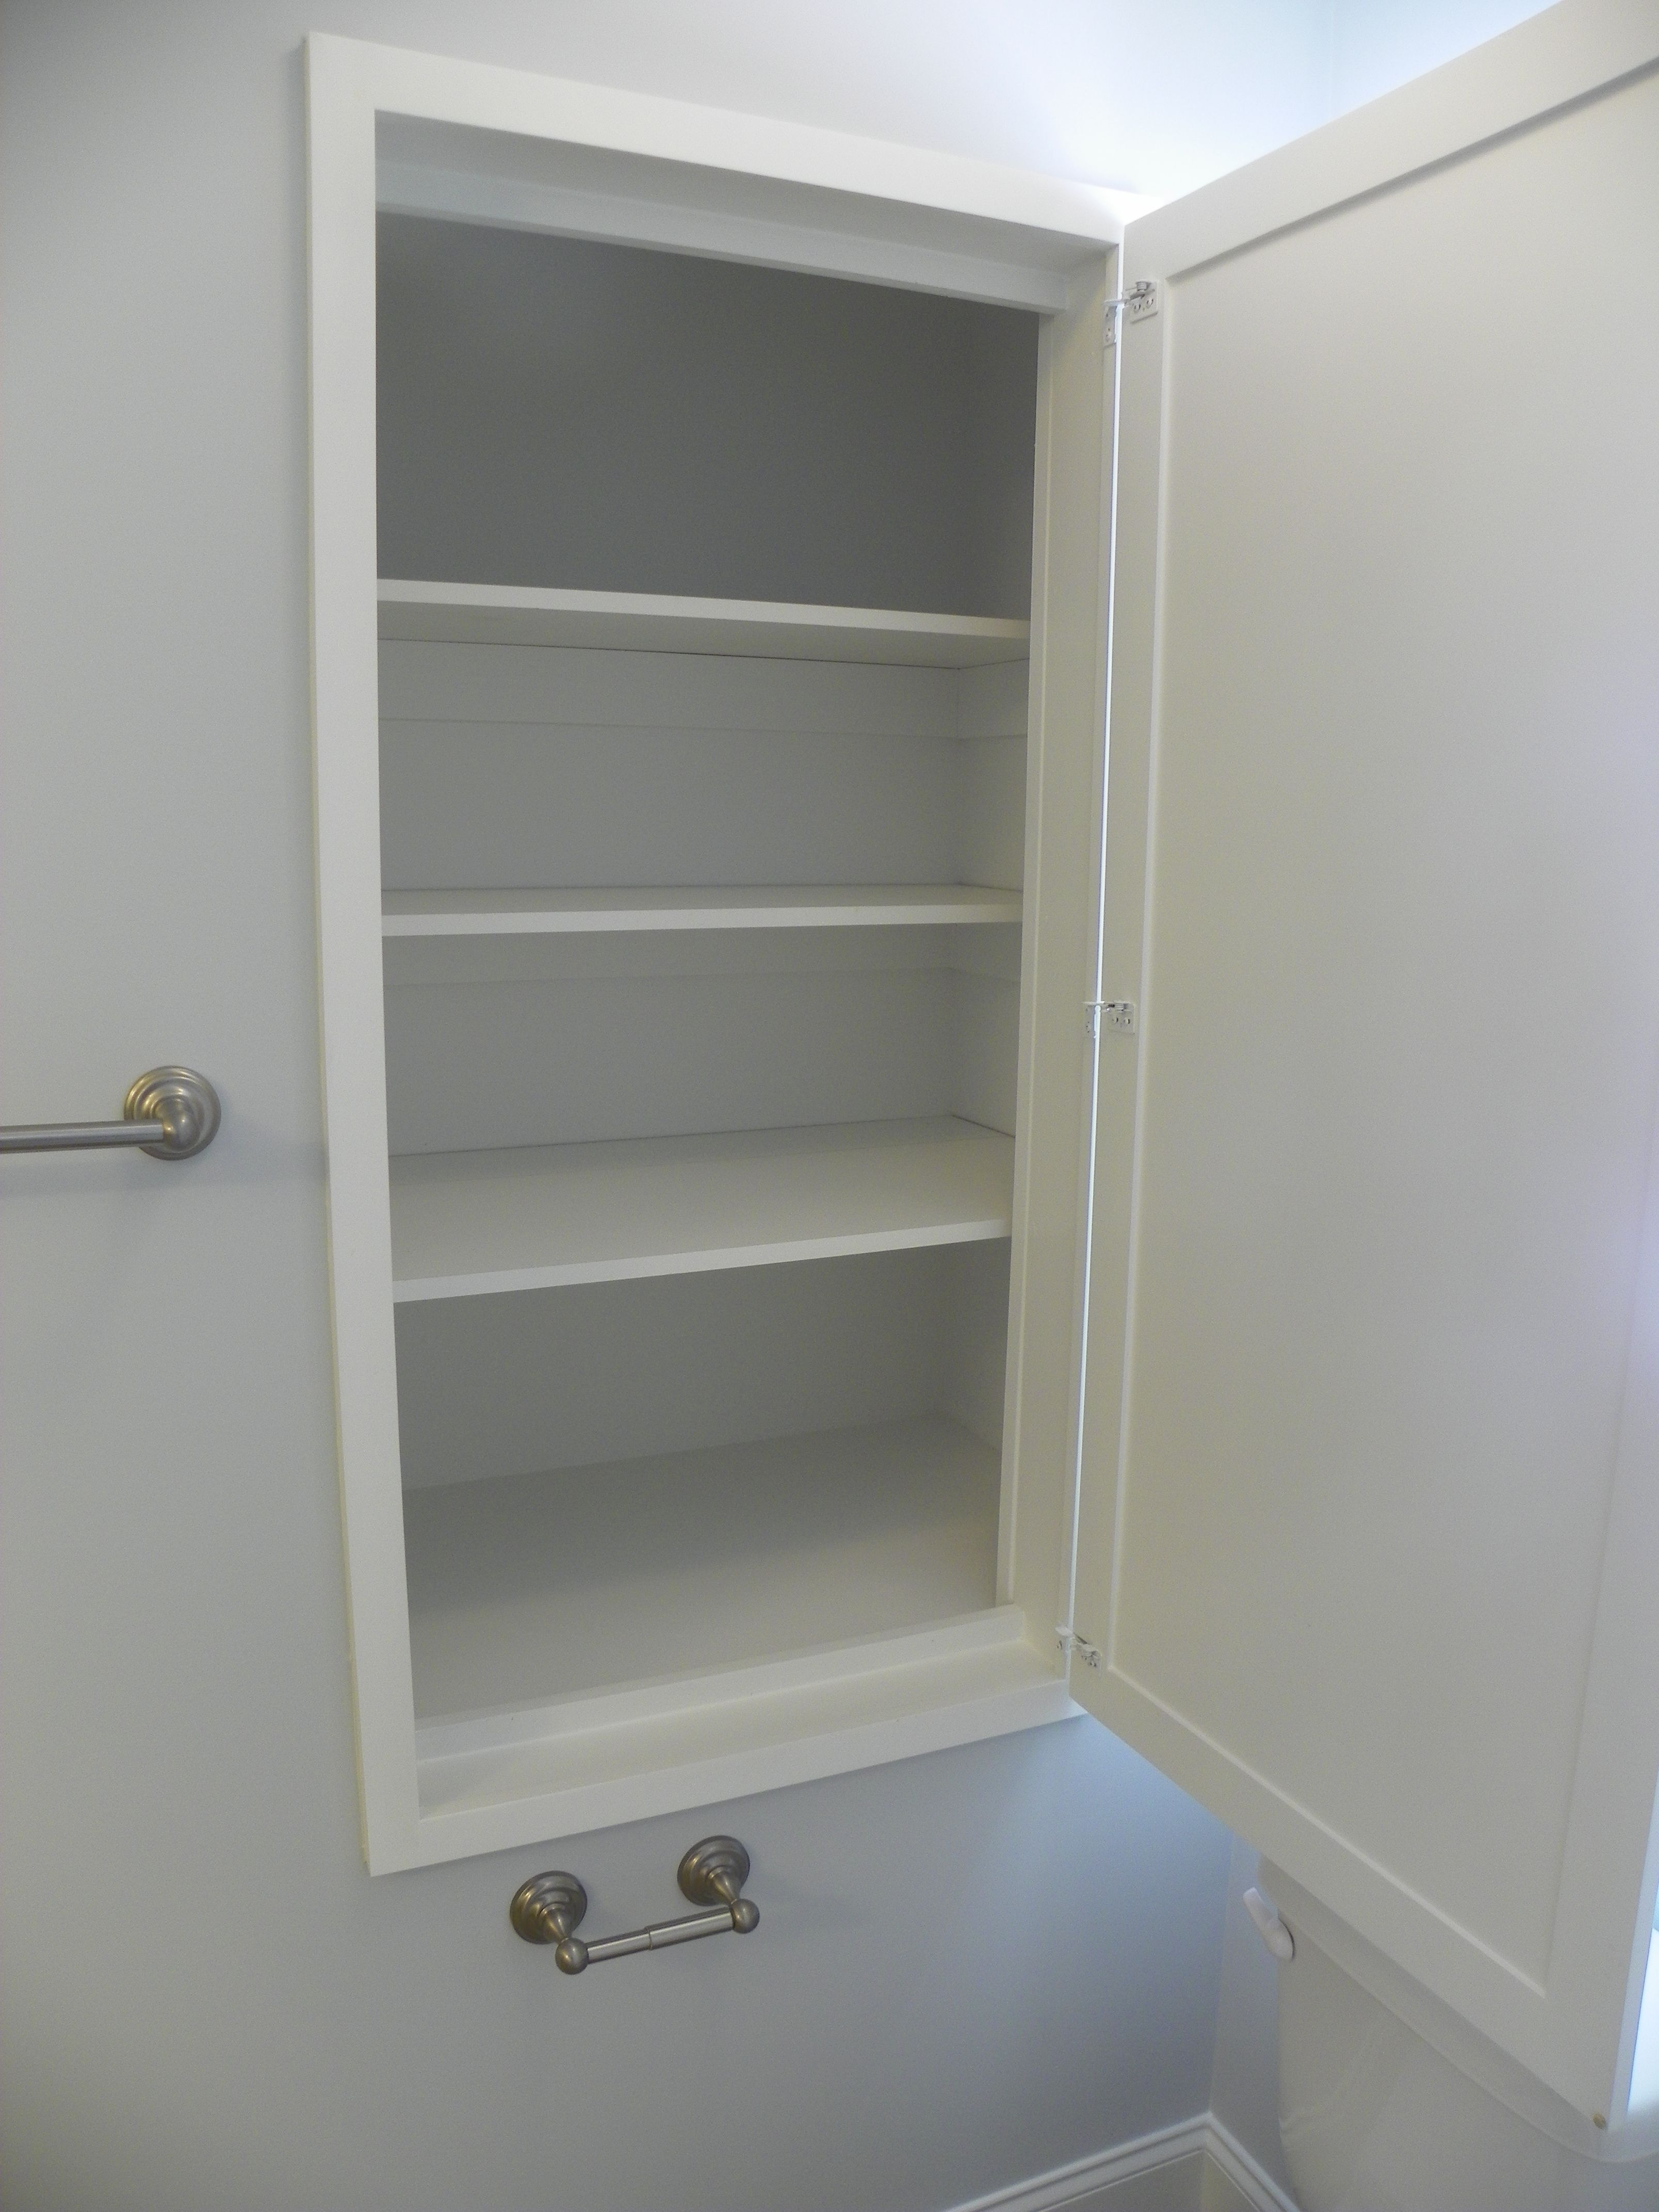 Linen Cabinet Built In To Wall Cavity Next To Toilet Door Swings for sizing 3216 X 4288